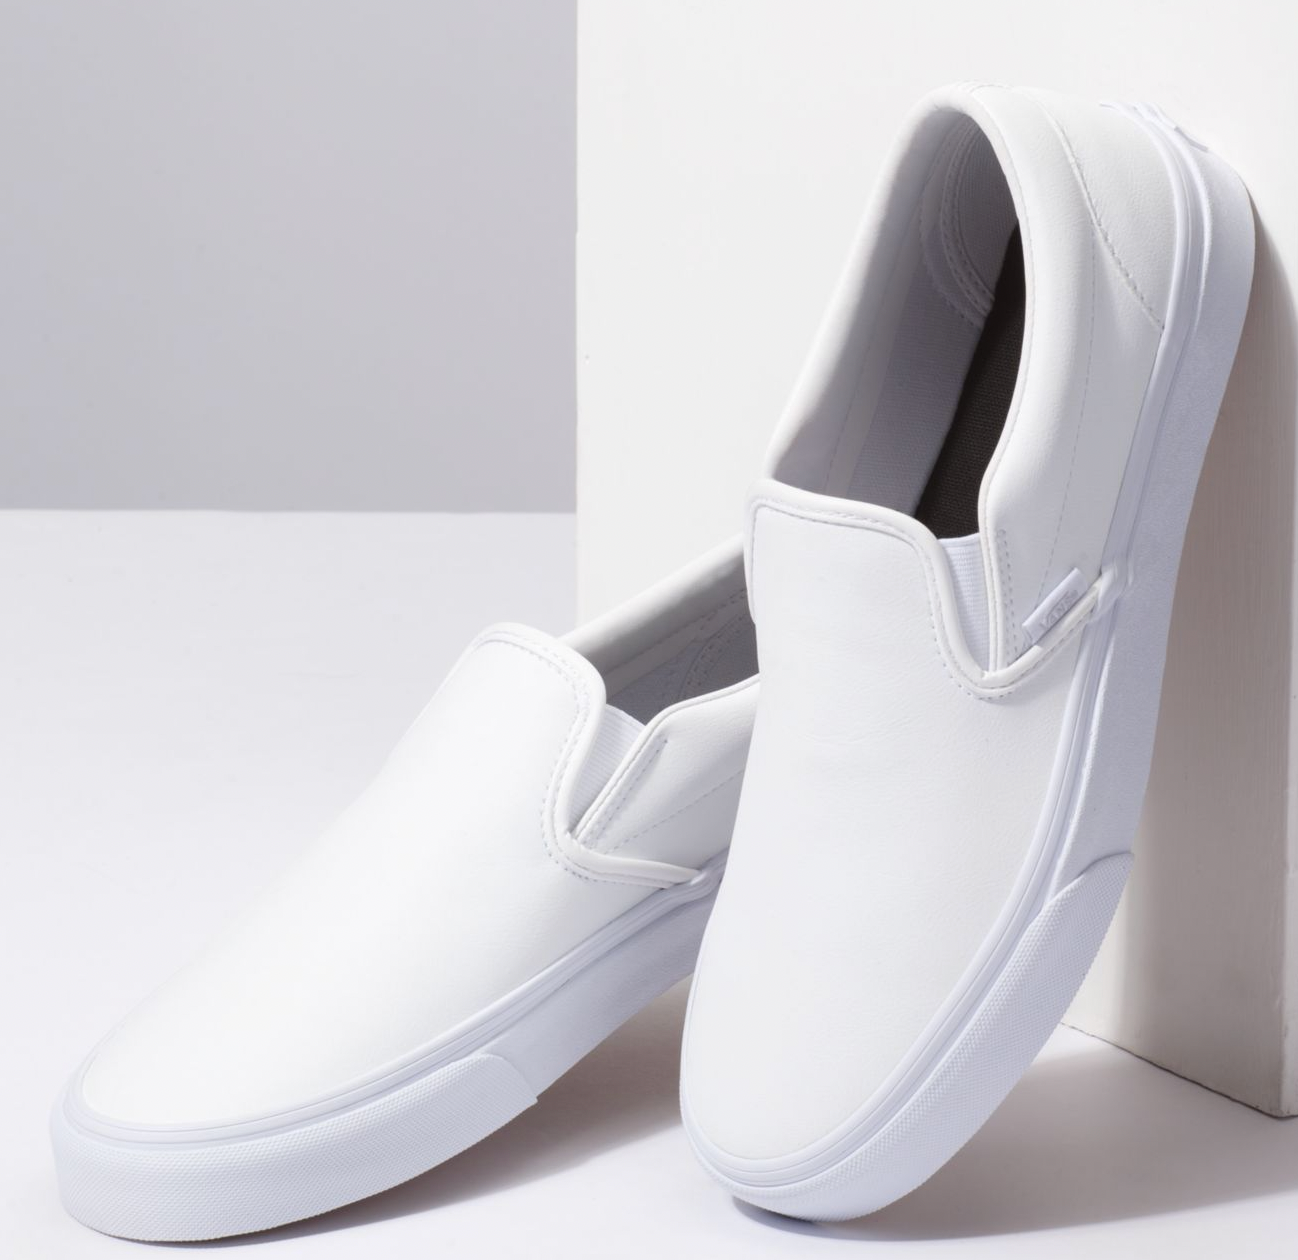 White Slip On Vans sales spike enormously after Squid Game premiere